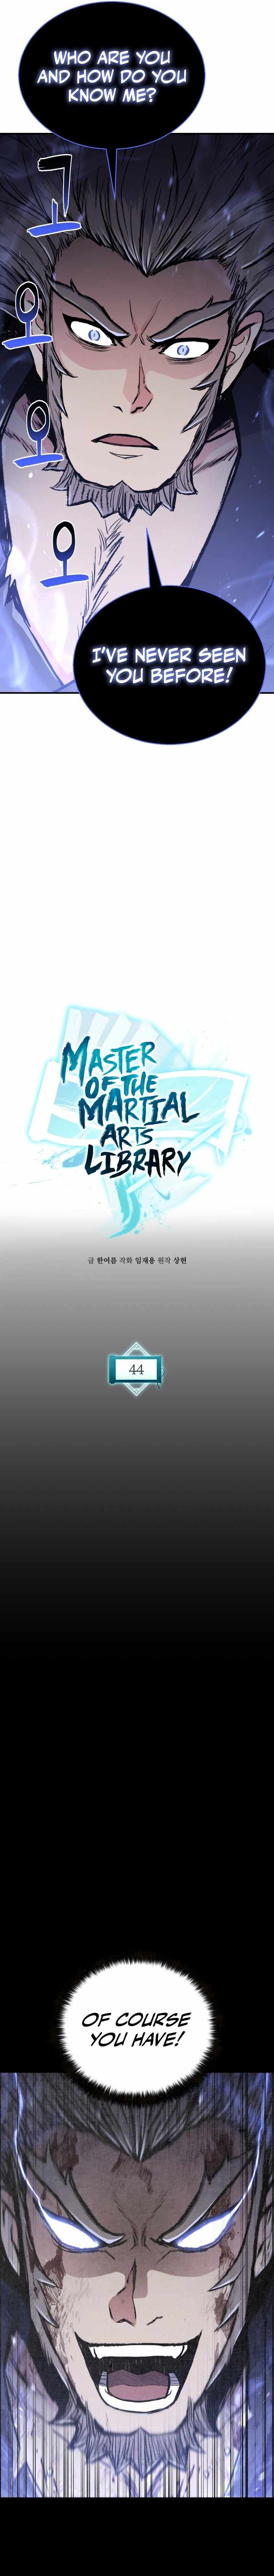 Master of the Martial Arts Library Chapter 44